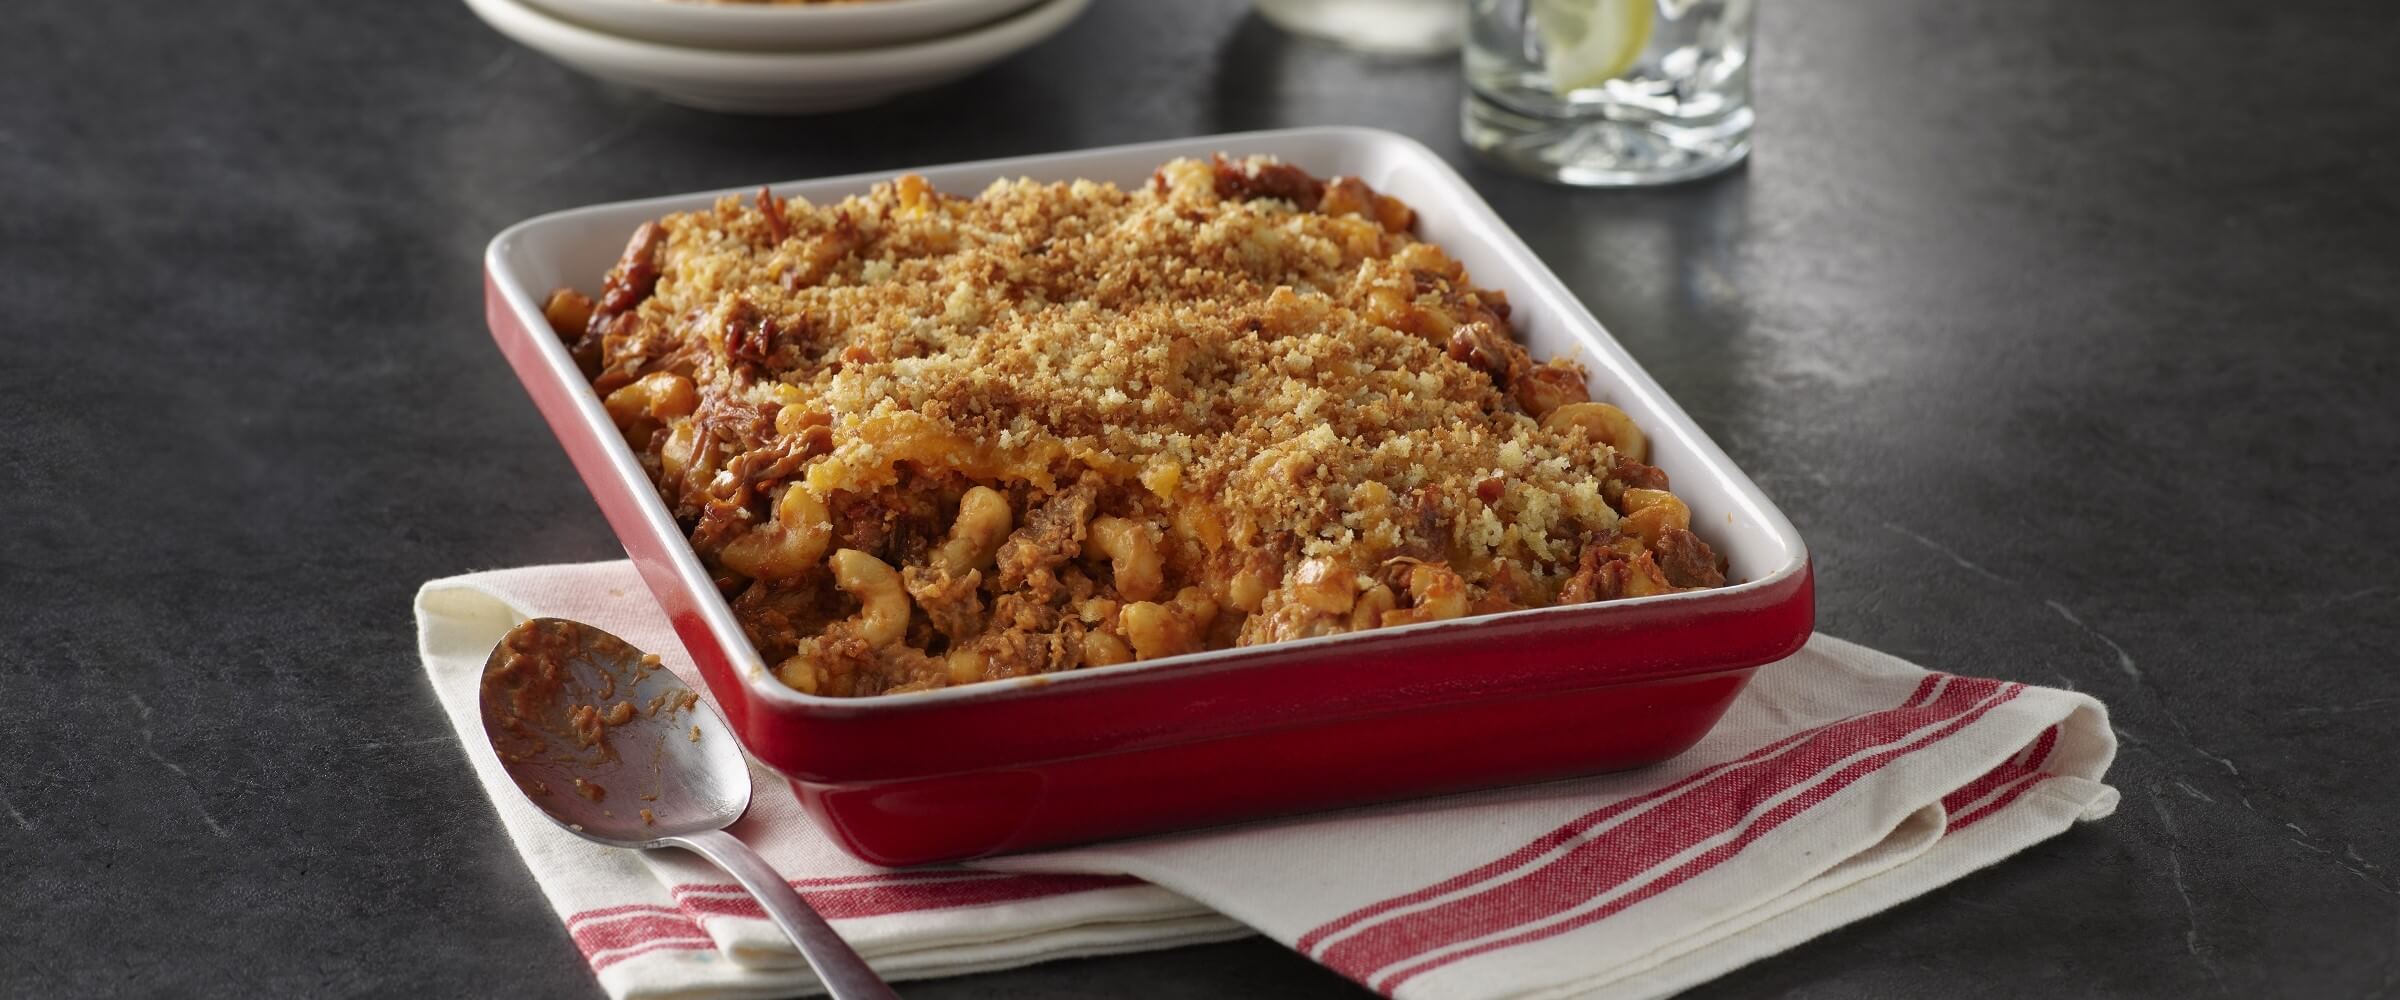 BBQ pulled pork macaroni and cheese topped with breadcrumbs in red dish on a striped napkin